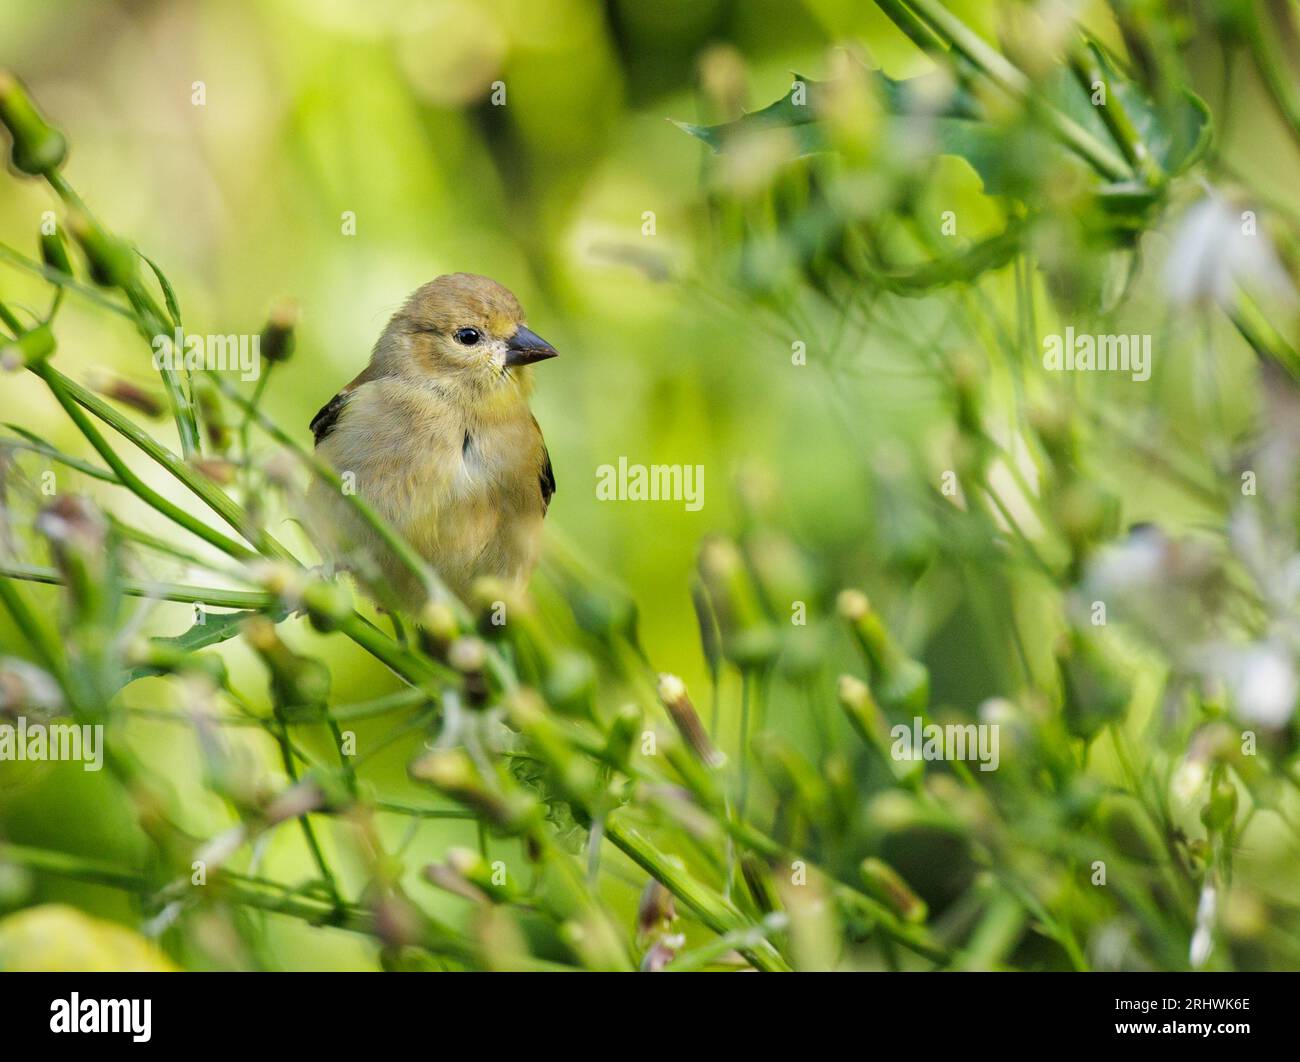 A goldfinch sits in an American burnweed feeding on its feathery seeds. Stock Photo